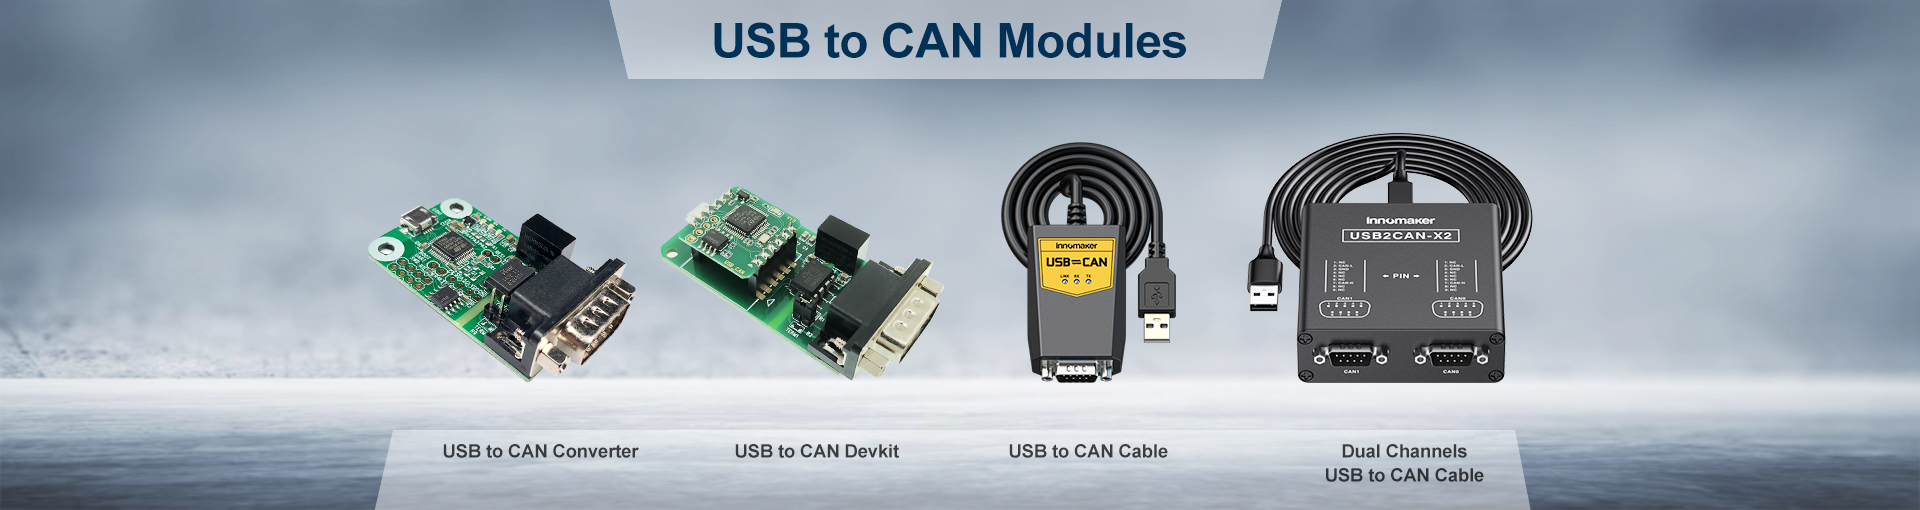 Banner_USB_to_can_modules